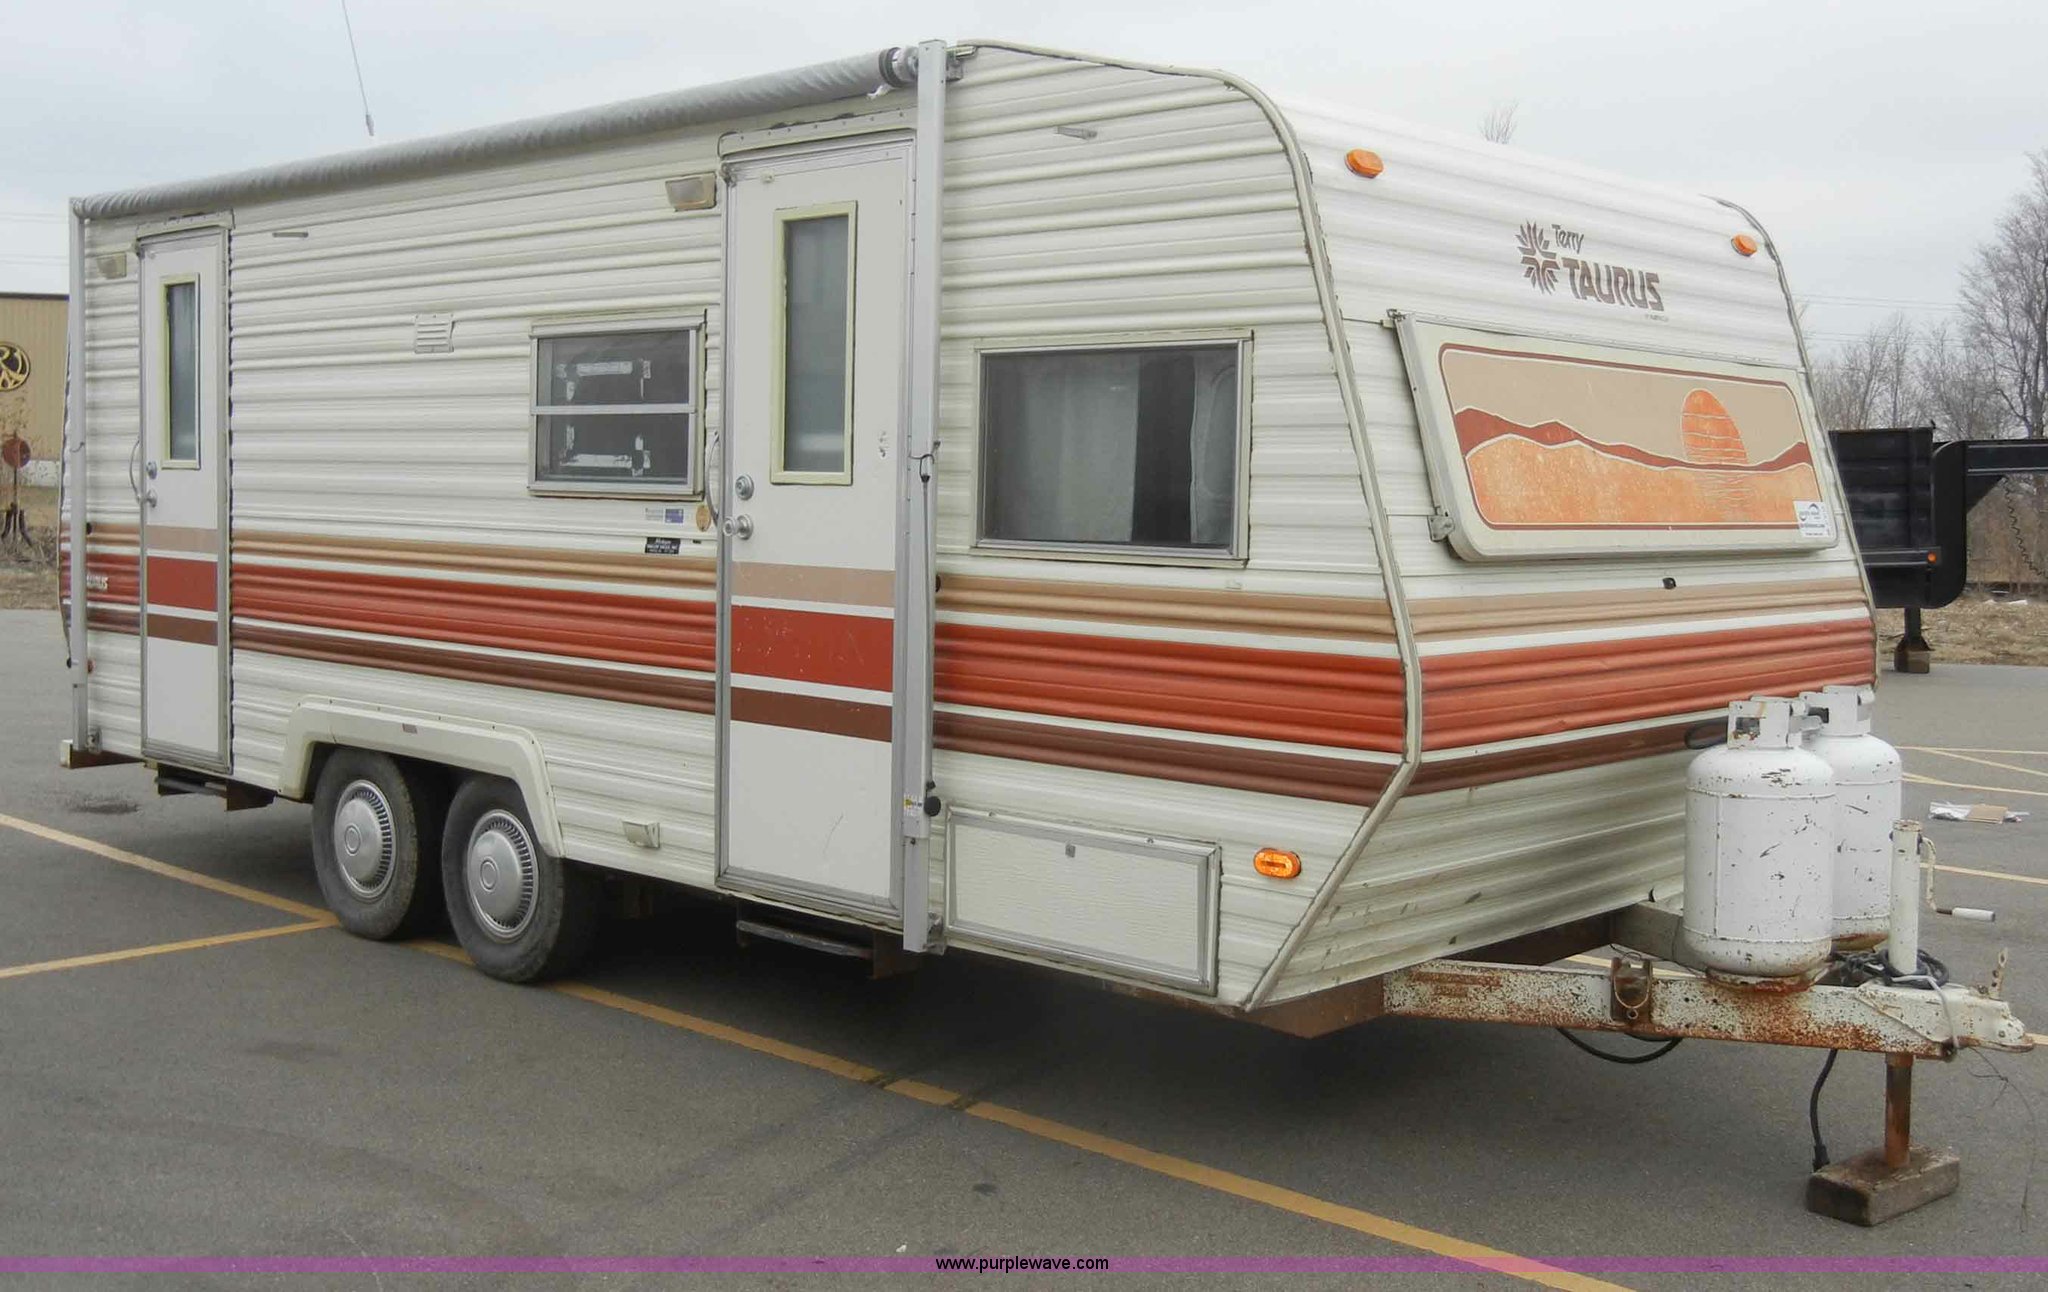 1996 Fleetwood Terry Travel Trailer Owners Manual - generousghost Fleetwood Terry Travel Trailer Owners Manual